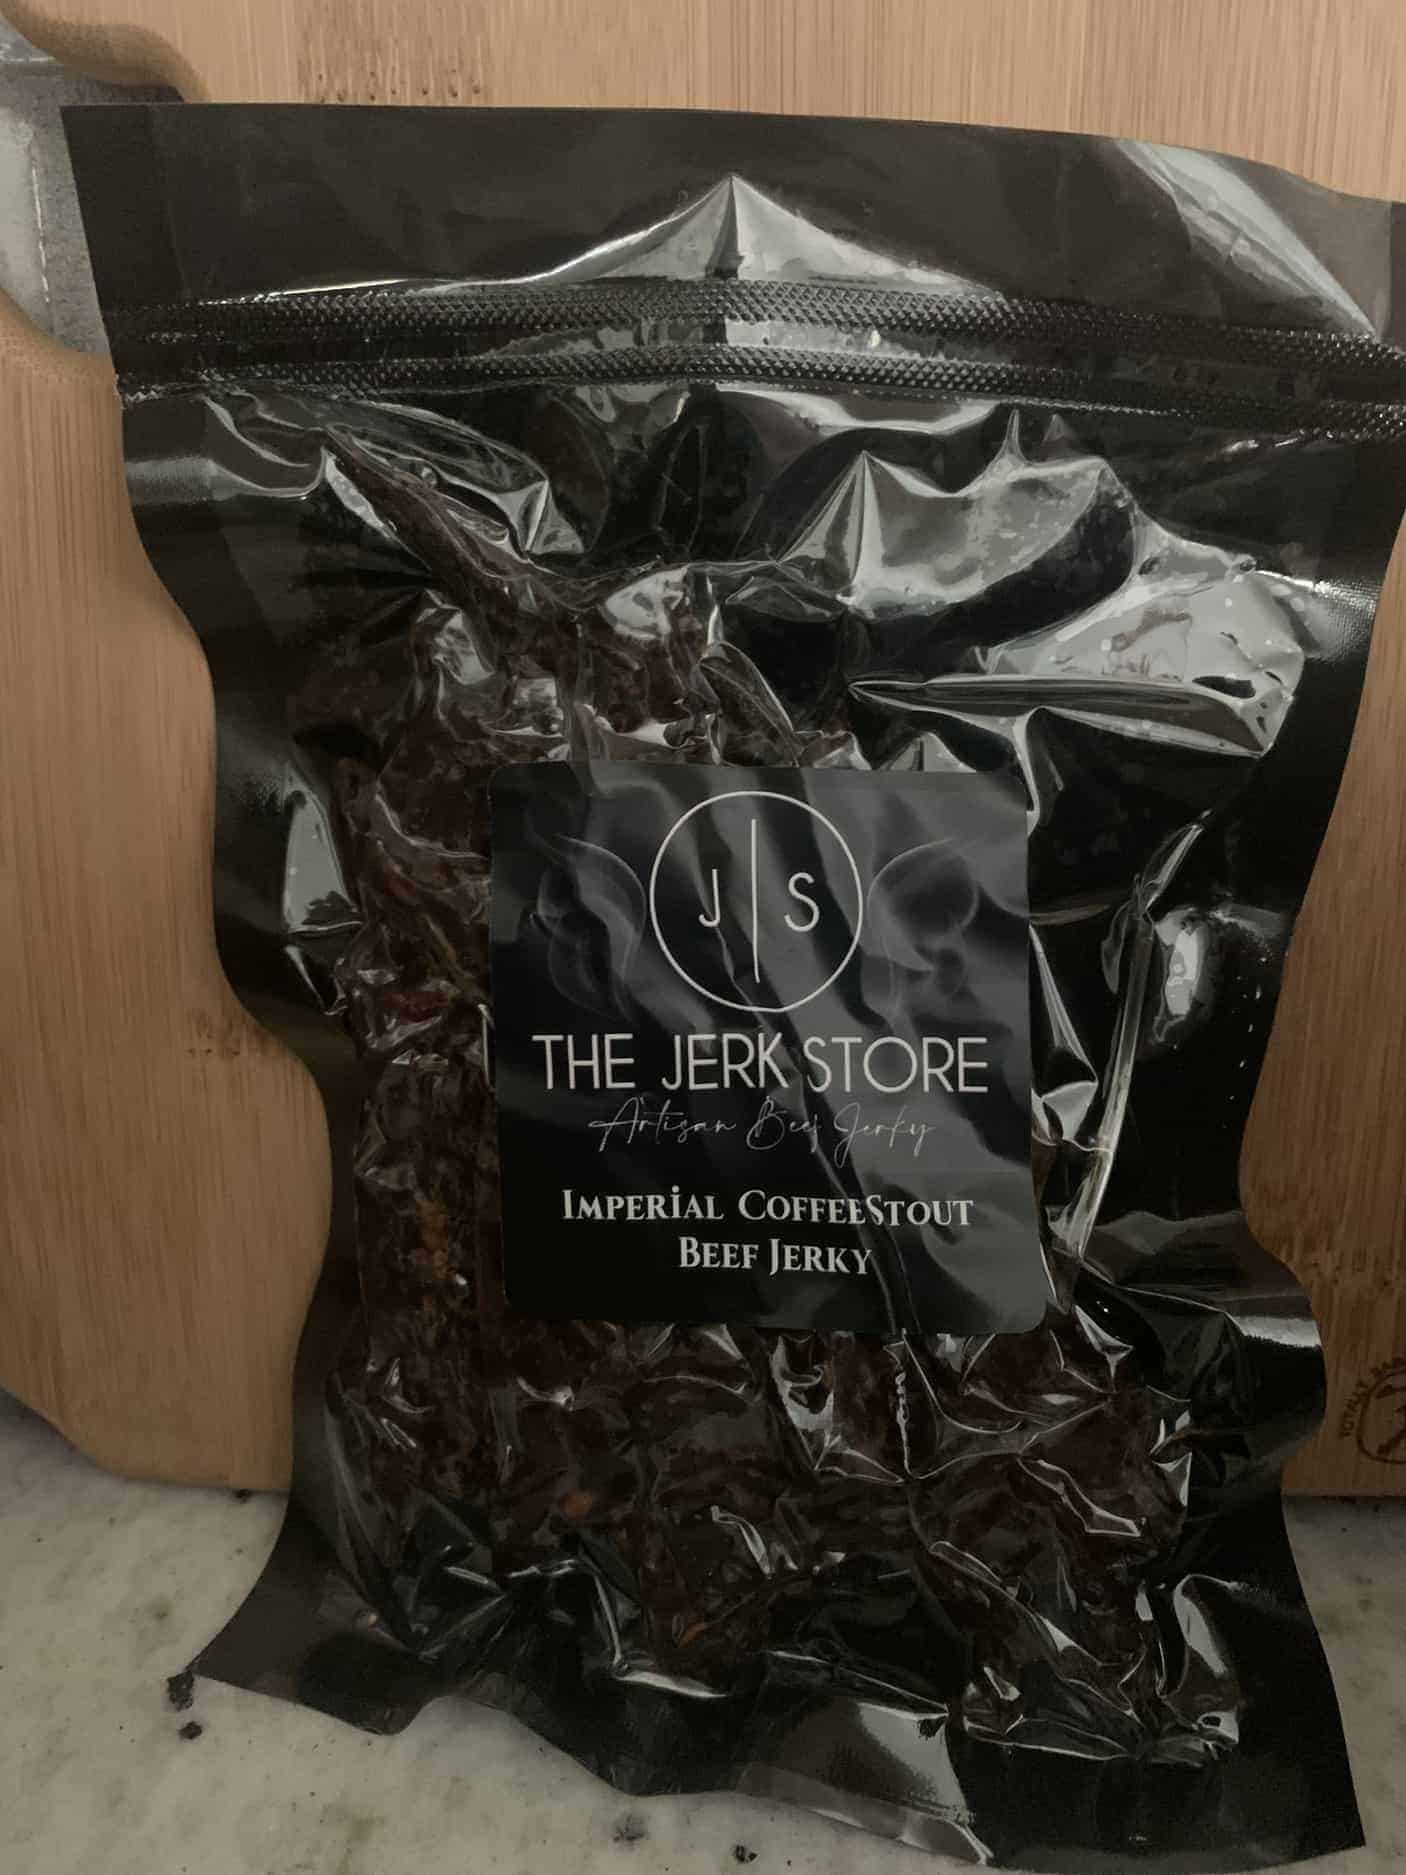 This Imperial Coffee Stout Beef Jerky is made with love by The Jerk Store! Shop more unique gift ideas today with Spots Initiatives, the best way to support creators.